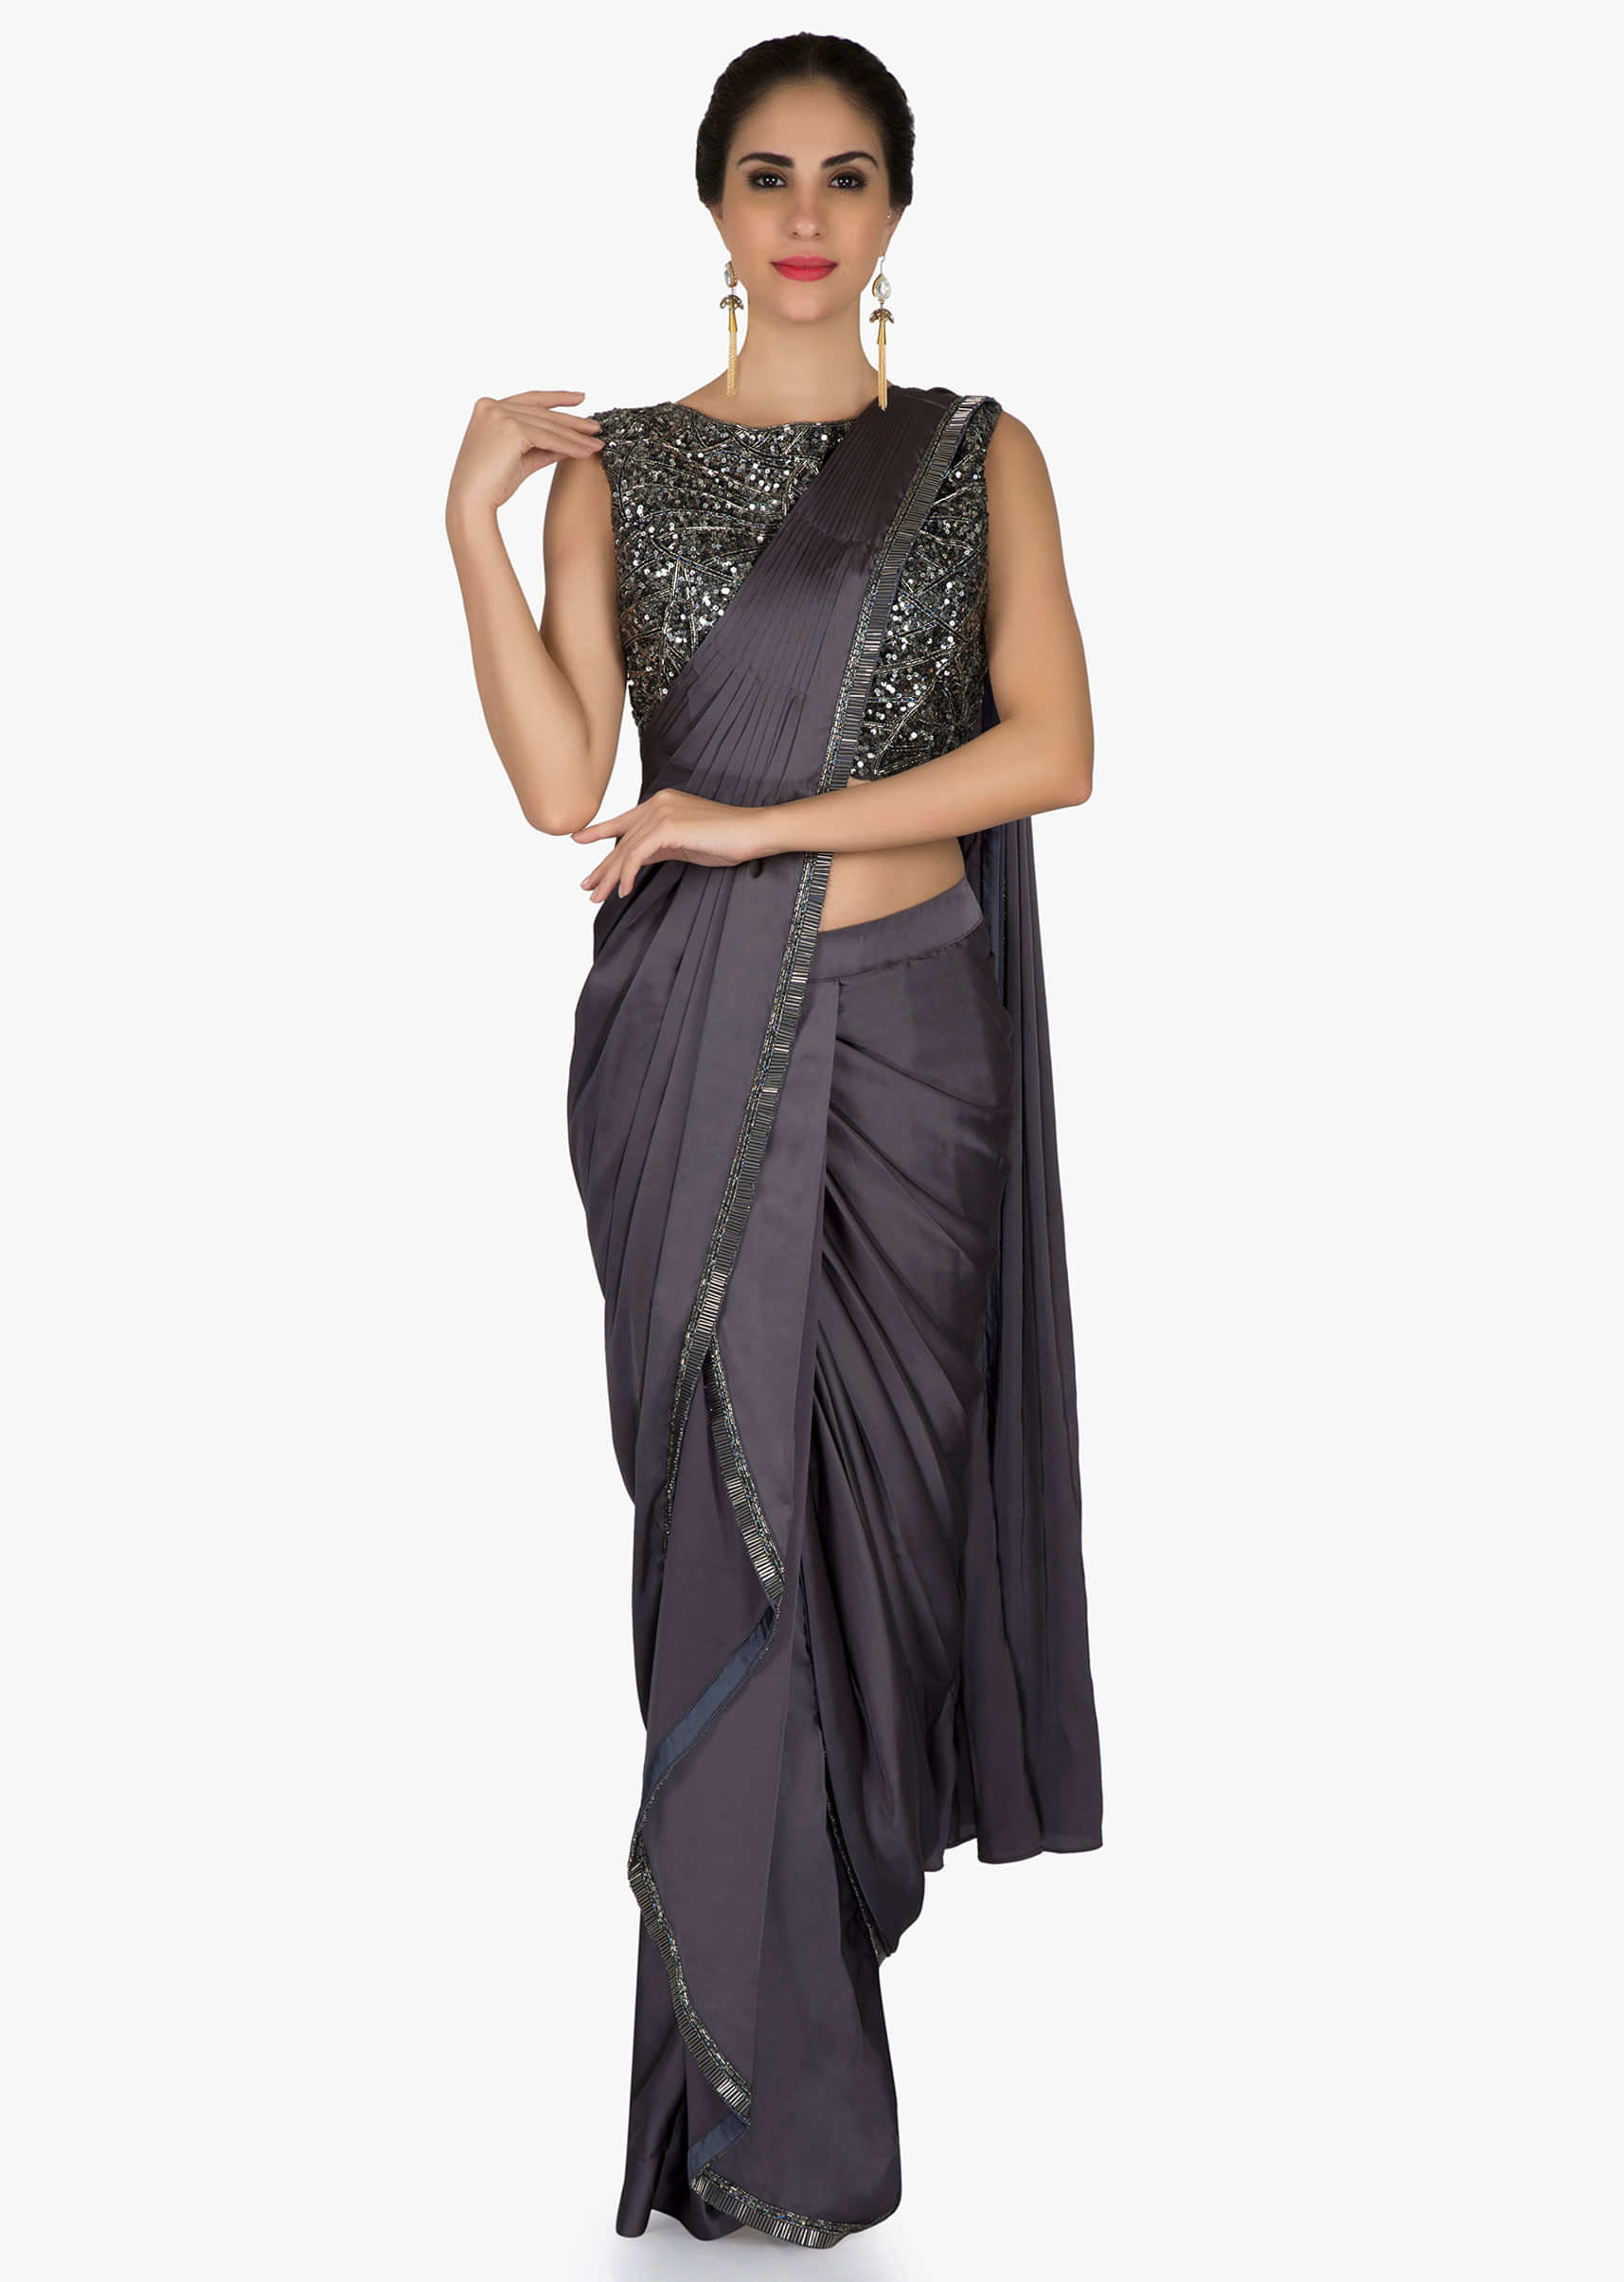 Grey Pre Stitched Saree In Cascade And Cowl Drape With Sequin Embroidered Blouse Online - Kalki Fashion